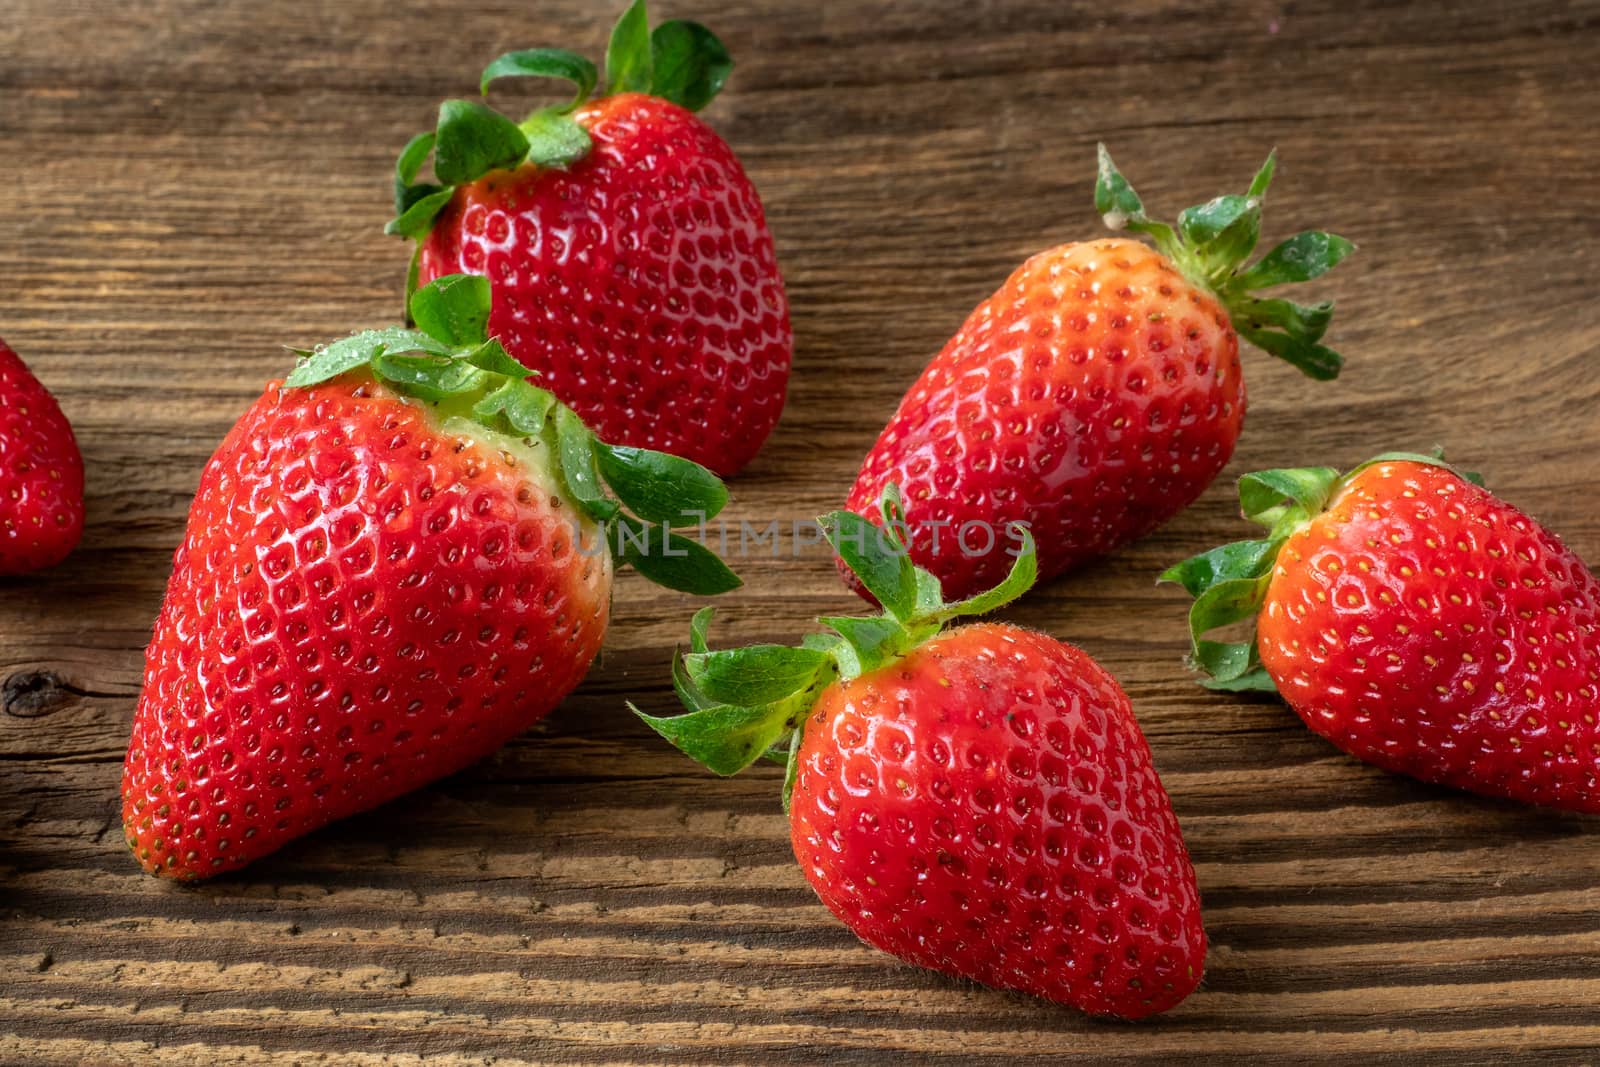 Ripe strawberries on a wooden table